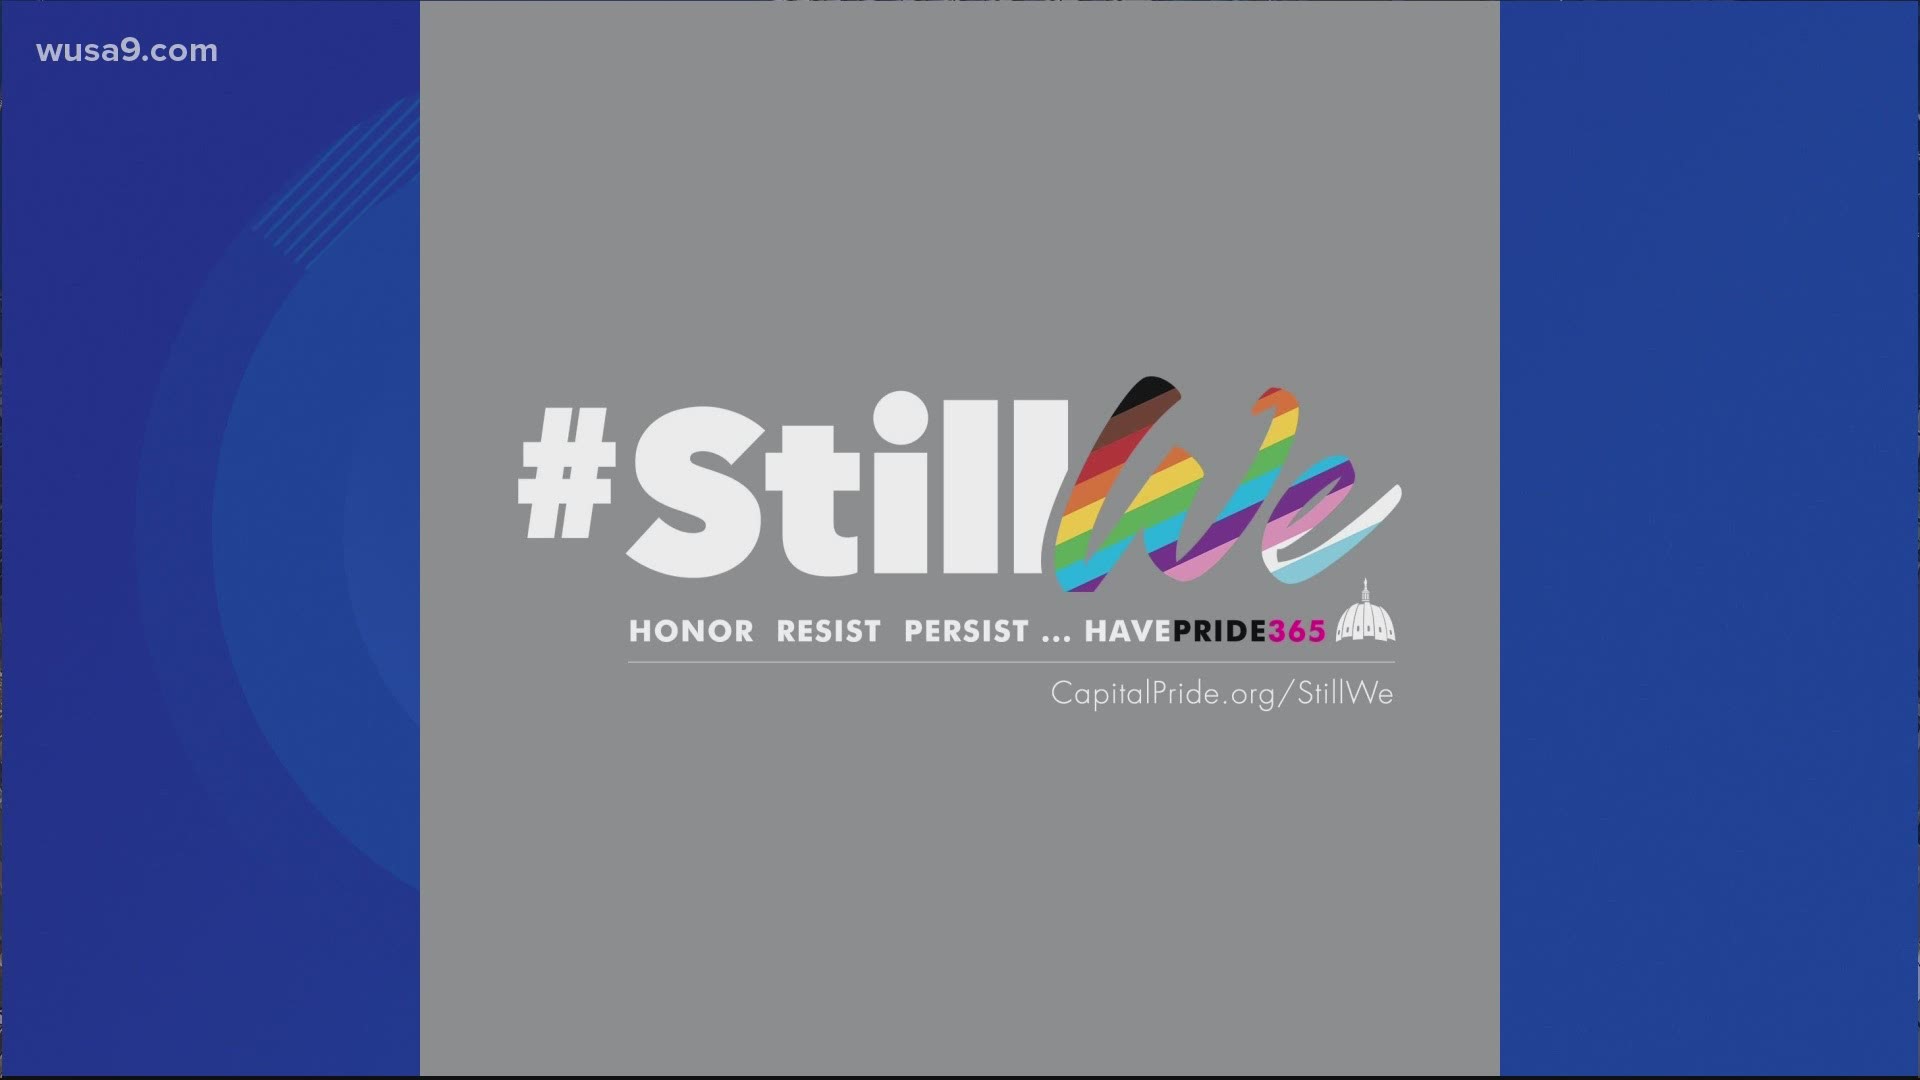 June is Pride month and this year's hashtag for Capital Pride is #StillW, to represent standing behind the protesters and their message.